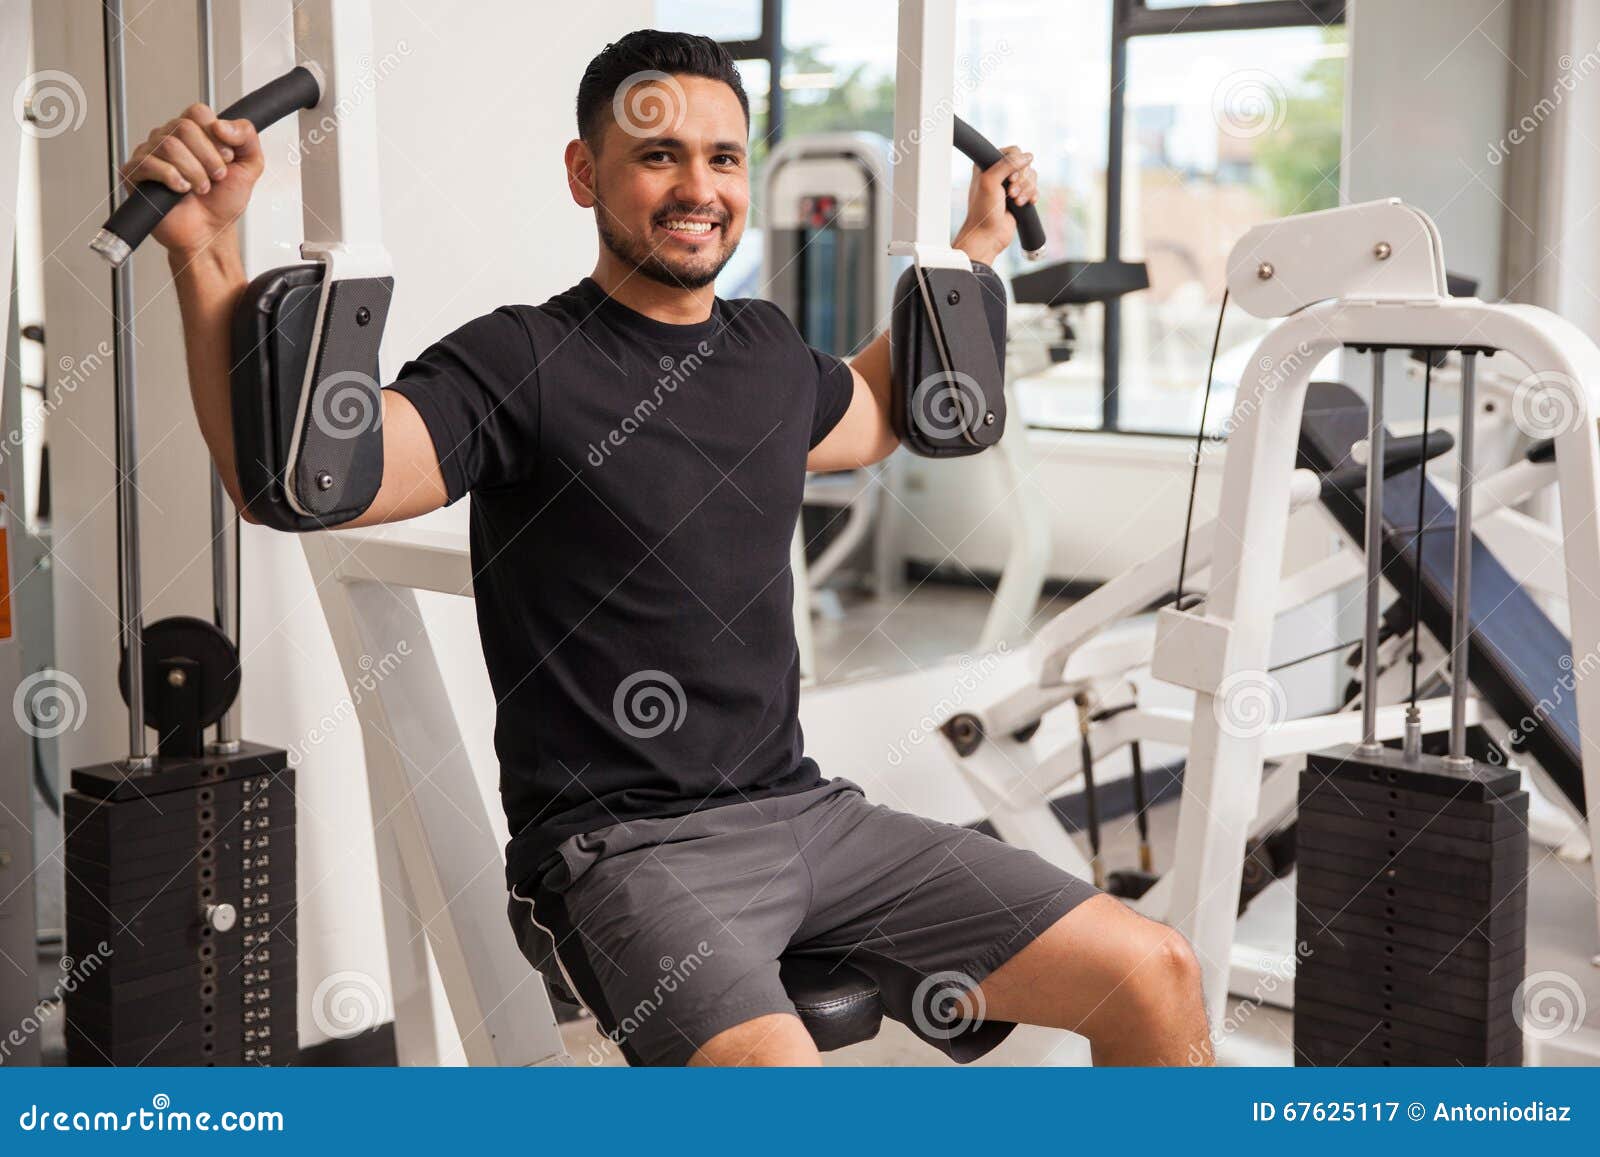 Latino Man Exercising At Home On An Elliptical During The Covid 19 Stock  Photo - Download Image Now - iStock